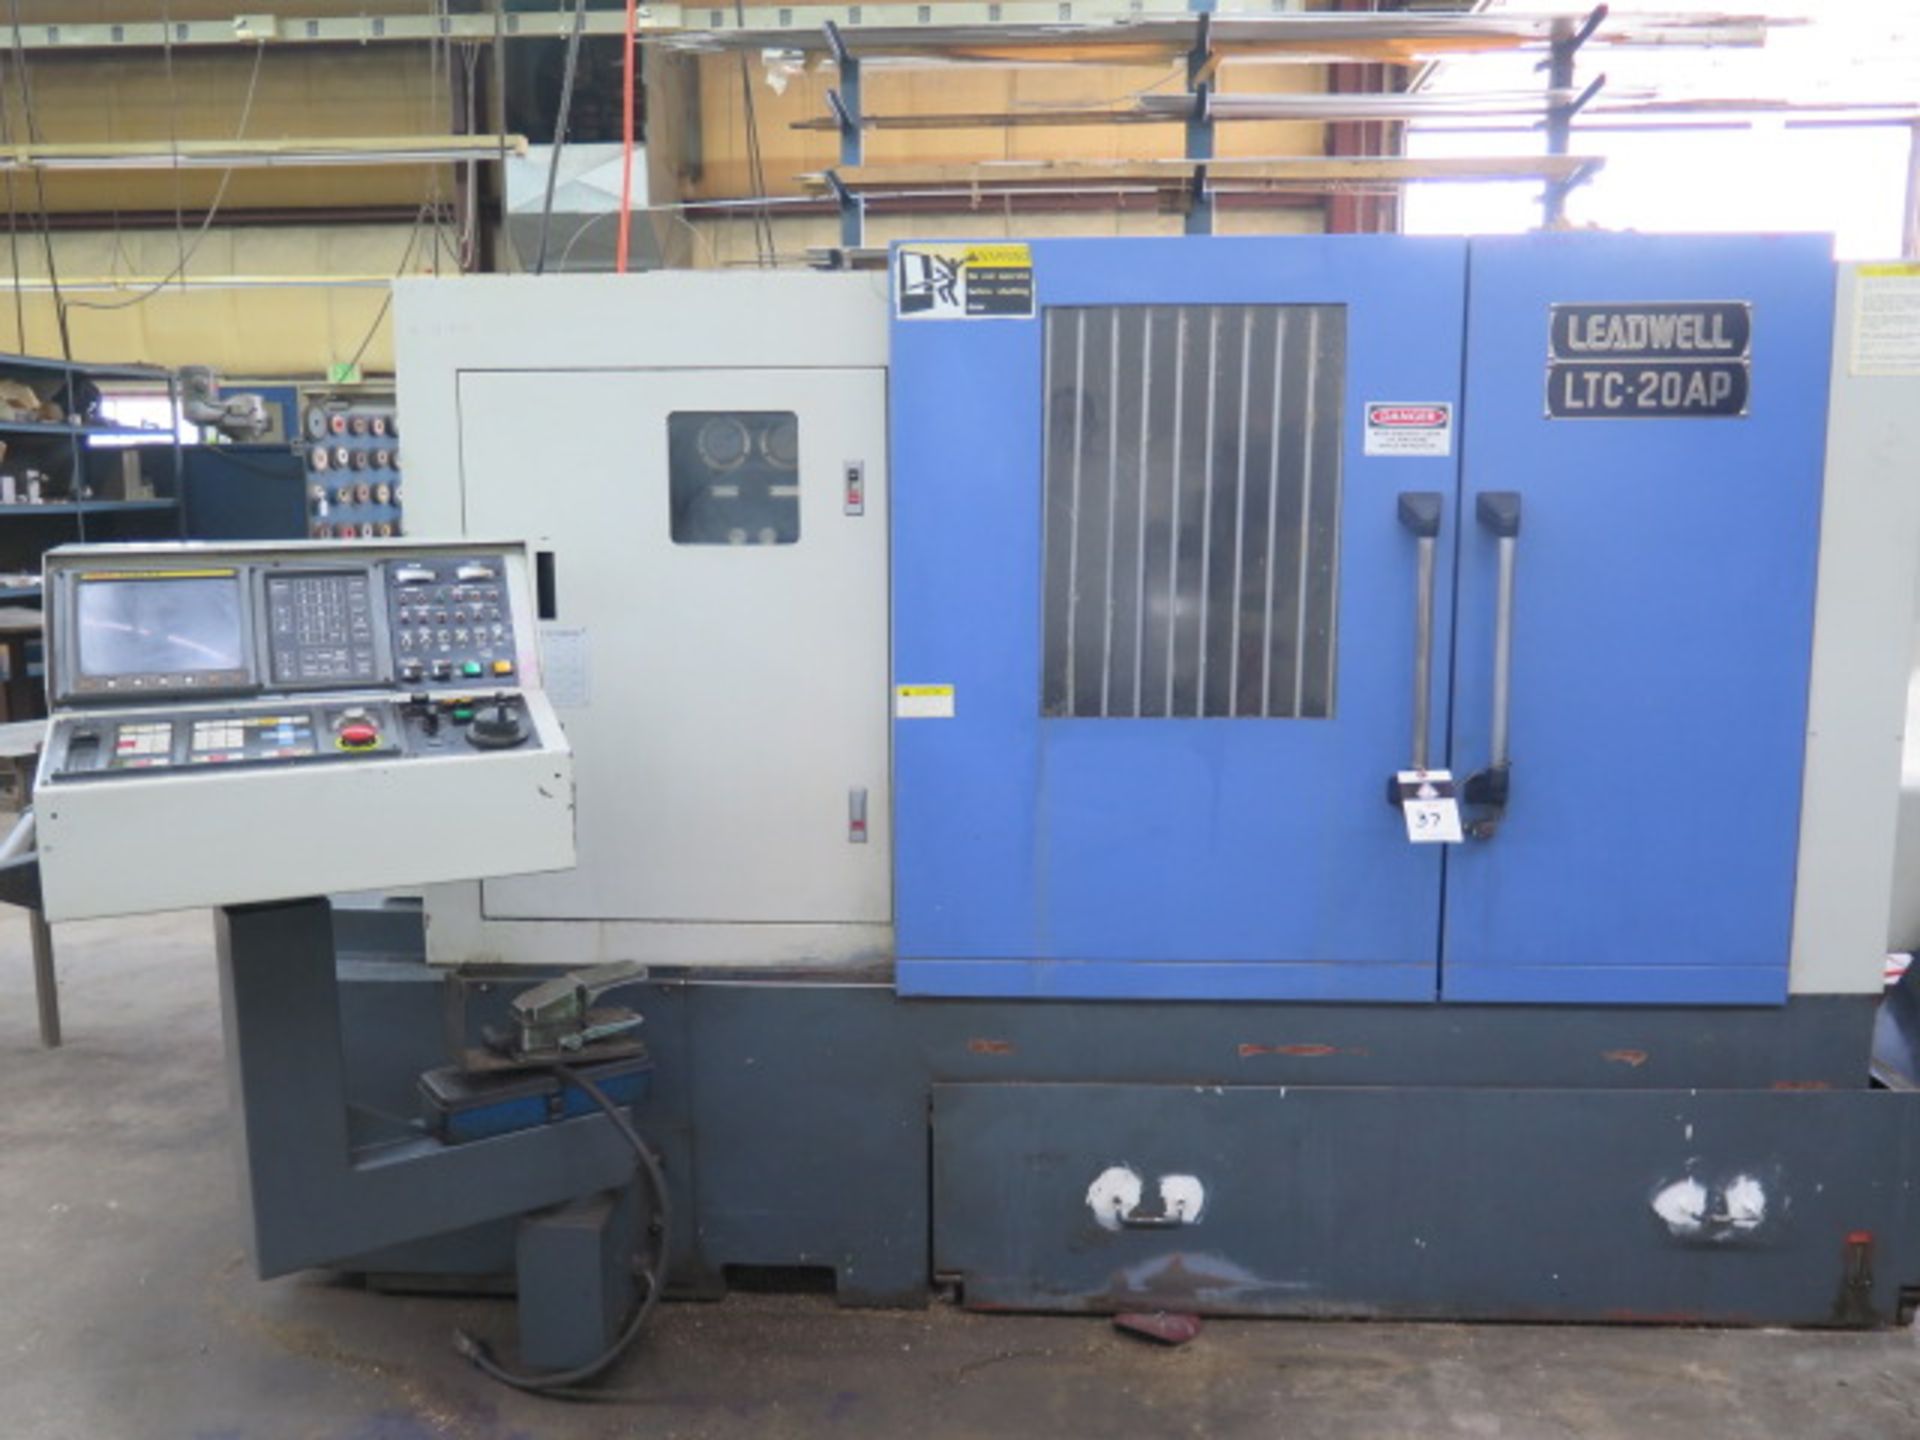 Leadwell LTC-20 AP CNC Turning Center w/ Fanuc 0-T Controls, Tool Presetter, 12-Station, SOLD AS IS